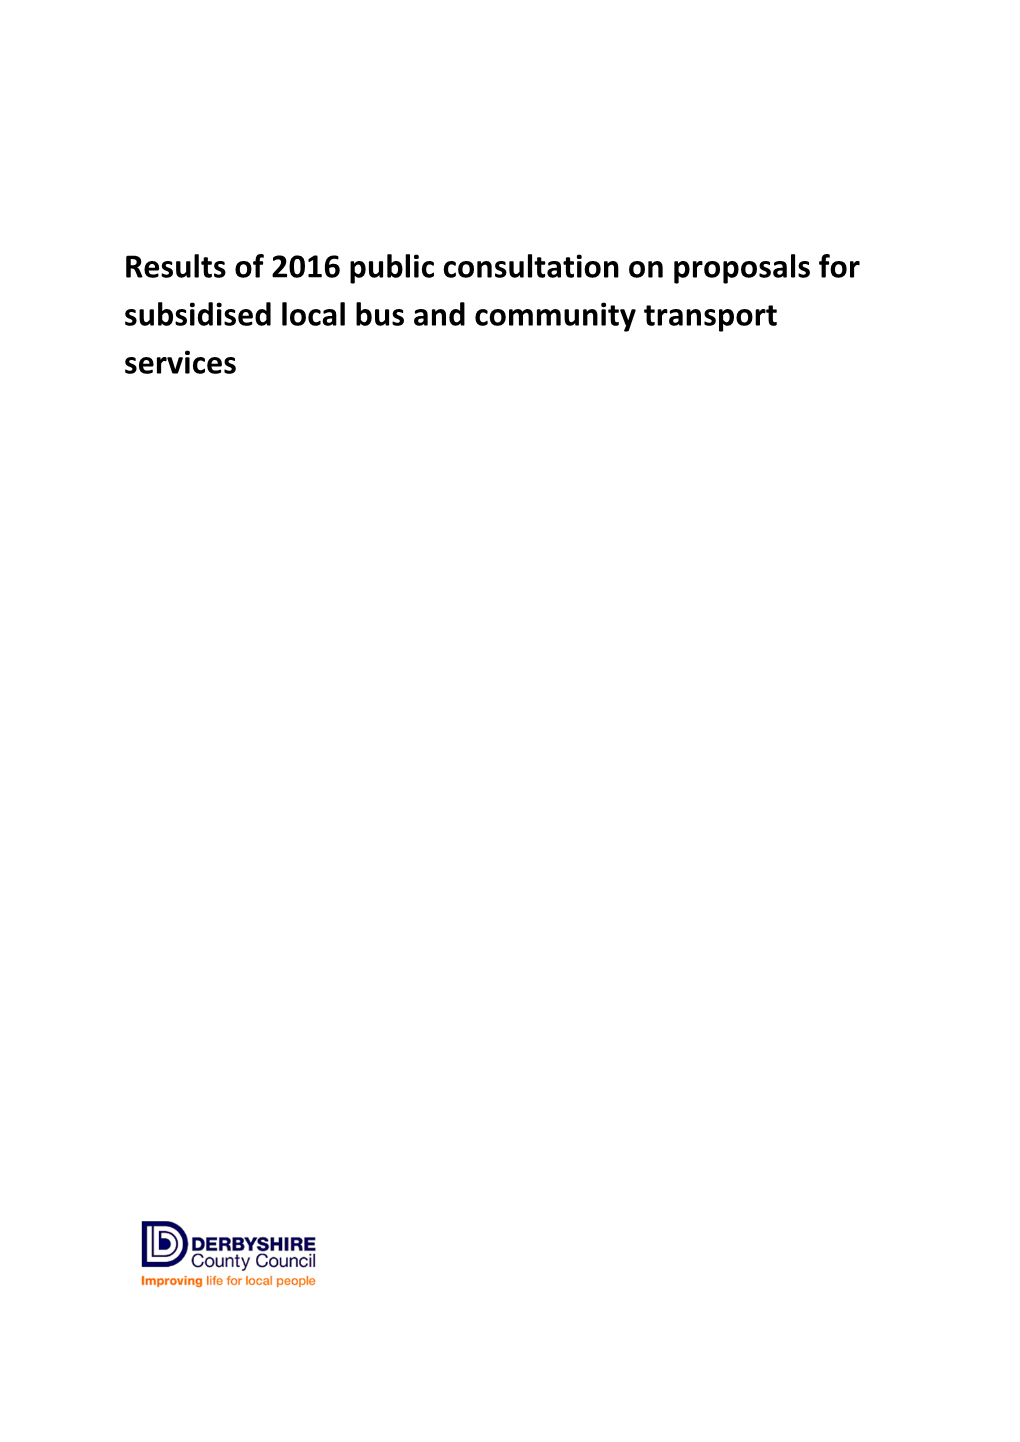 Results of 2016 Public Consultation on Proposals for Subsidised Local Bus and Community Transport Services 2016 Community Transport - Local Bus Consultation Page:1